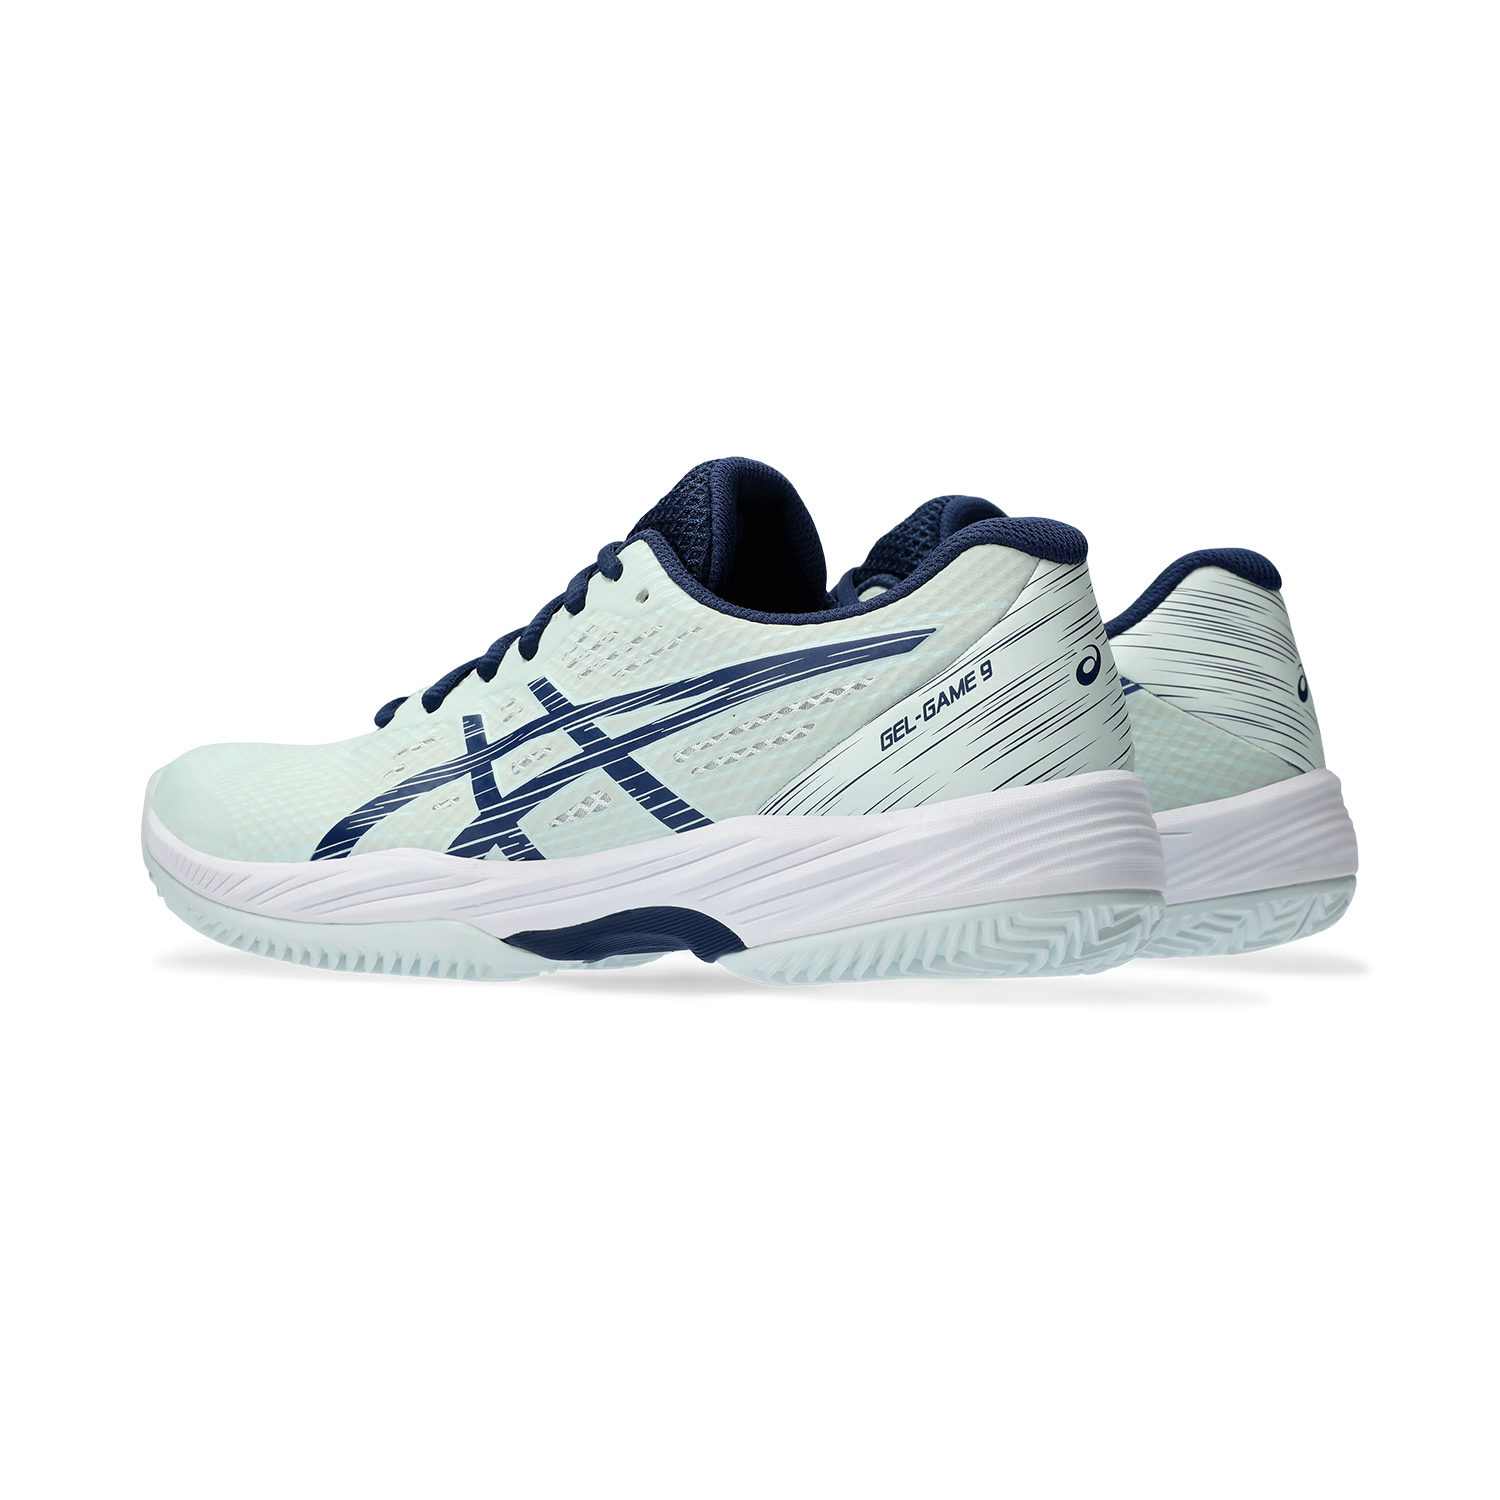 Asics Gel Game 9 Clay/OC - Pale Mint/Blue Expanse